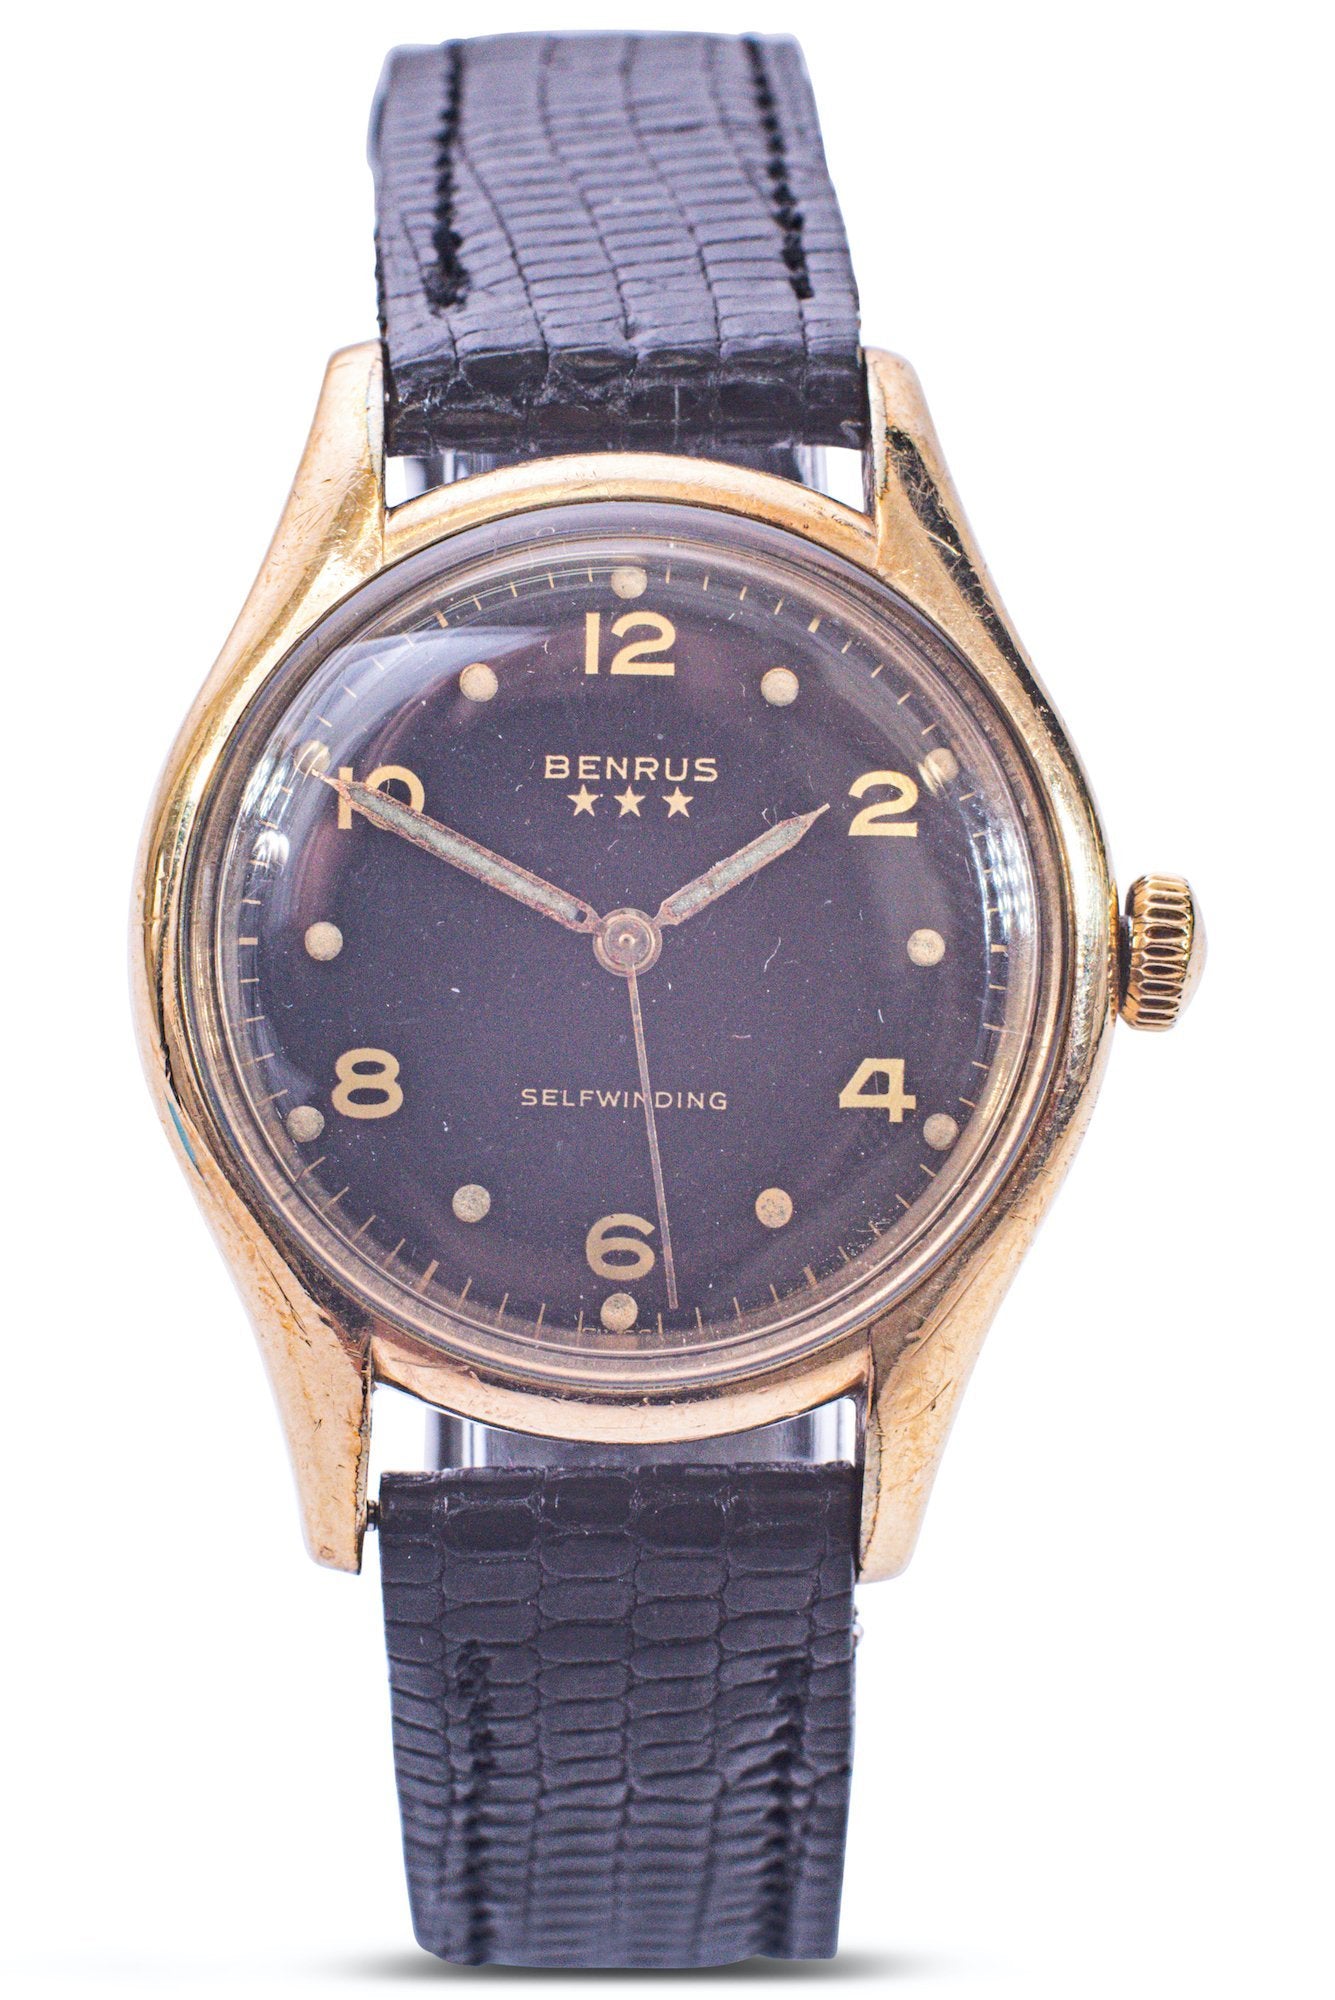 Benrus Three Star Series - Counting Time Watch Purveyors